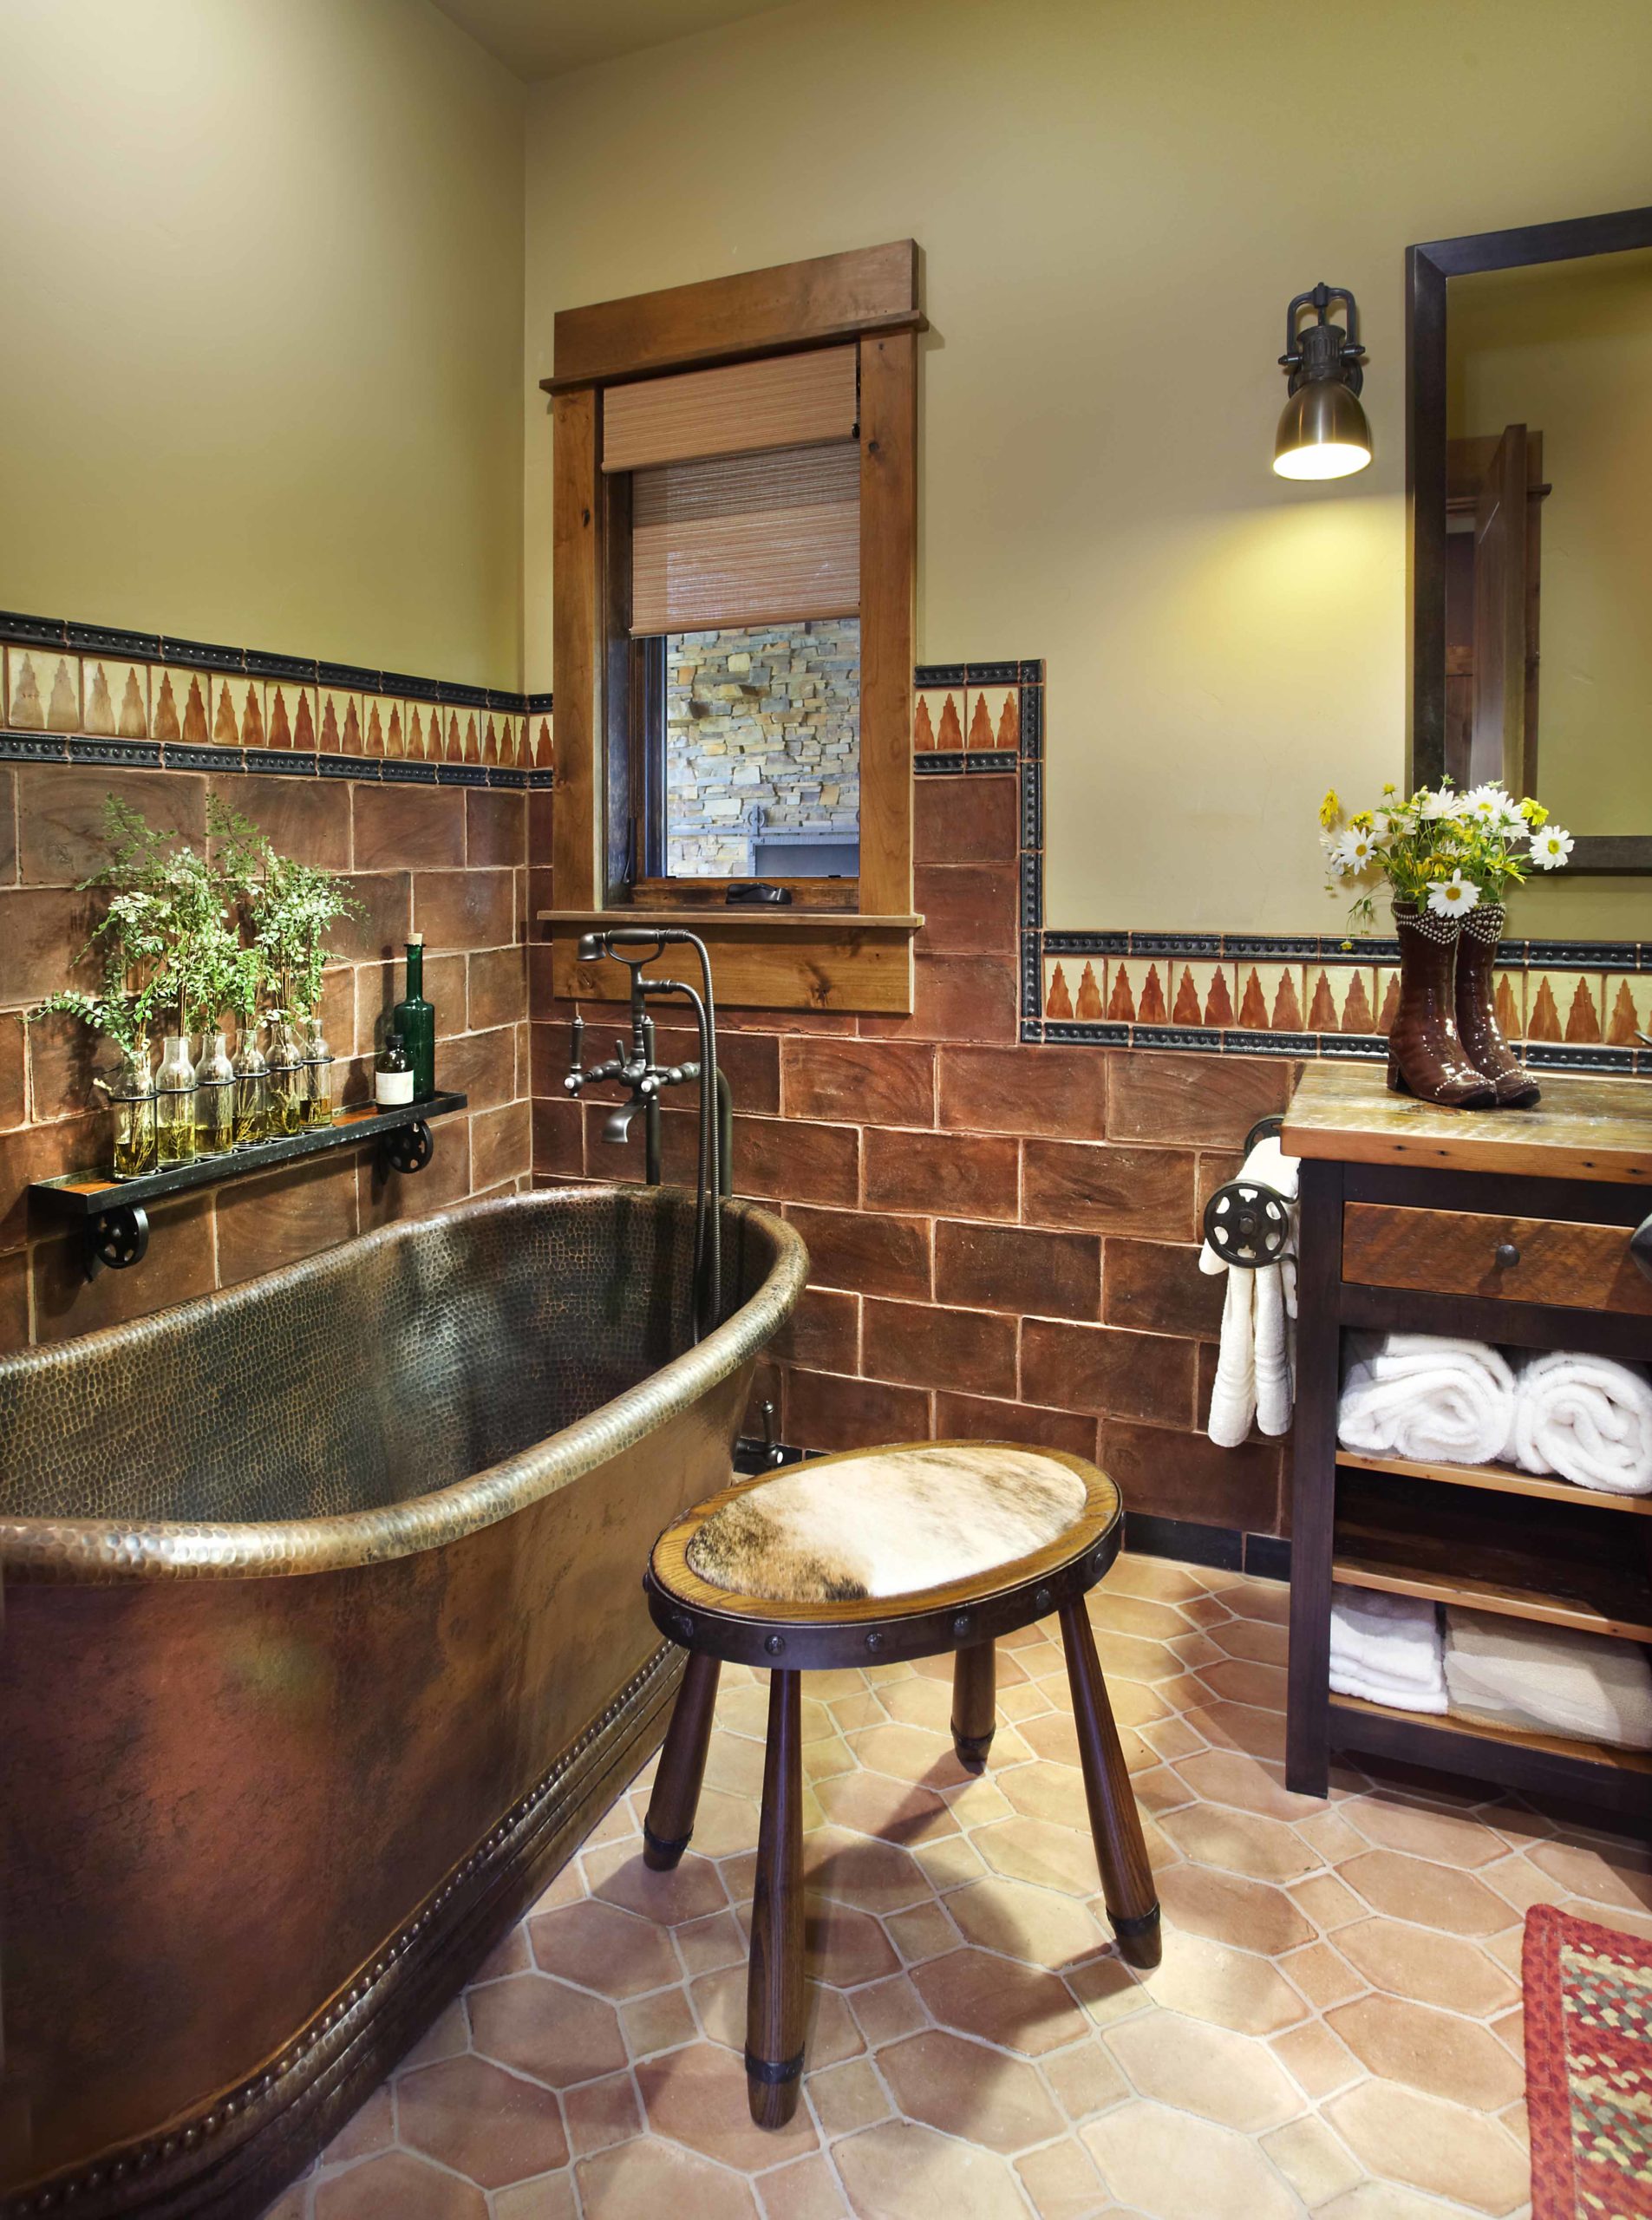 Bathroom with tiled floors and walls and a brown metal tub